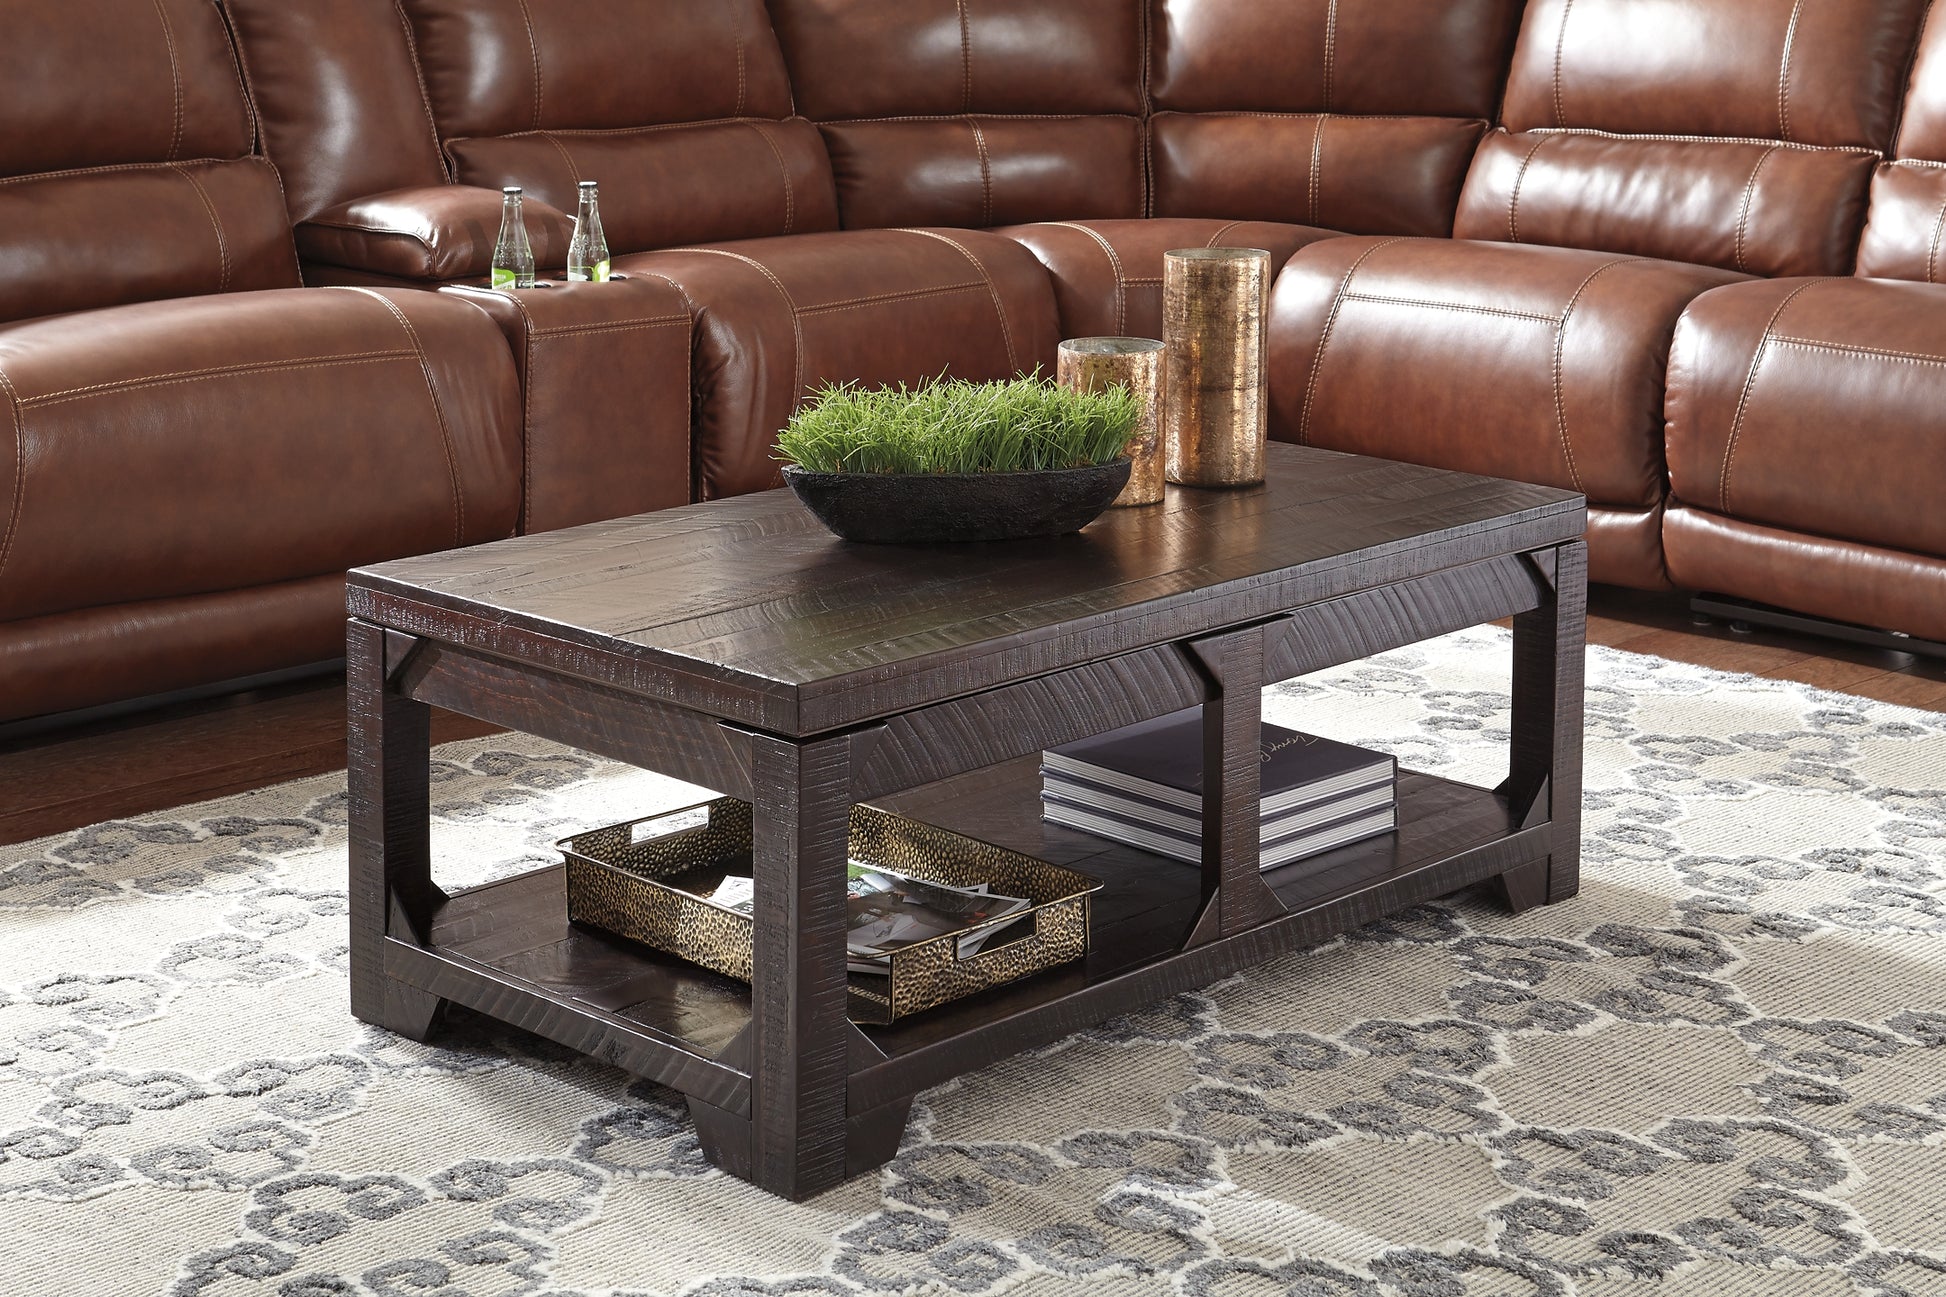 Rogness Coffee Table with 1 End Table Wilson Furniture (OH)  in Bridgeport, Ohio. Serving Bridgeport, Yorkville, Bellaire, & Avondale